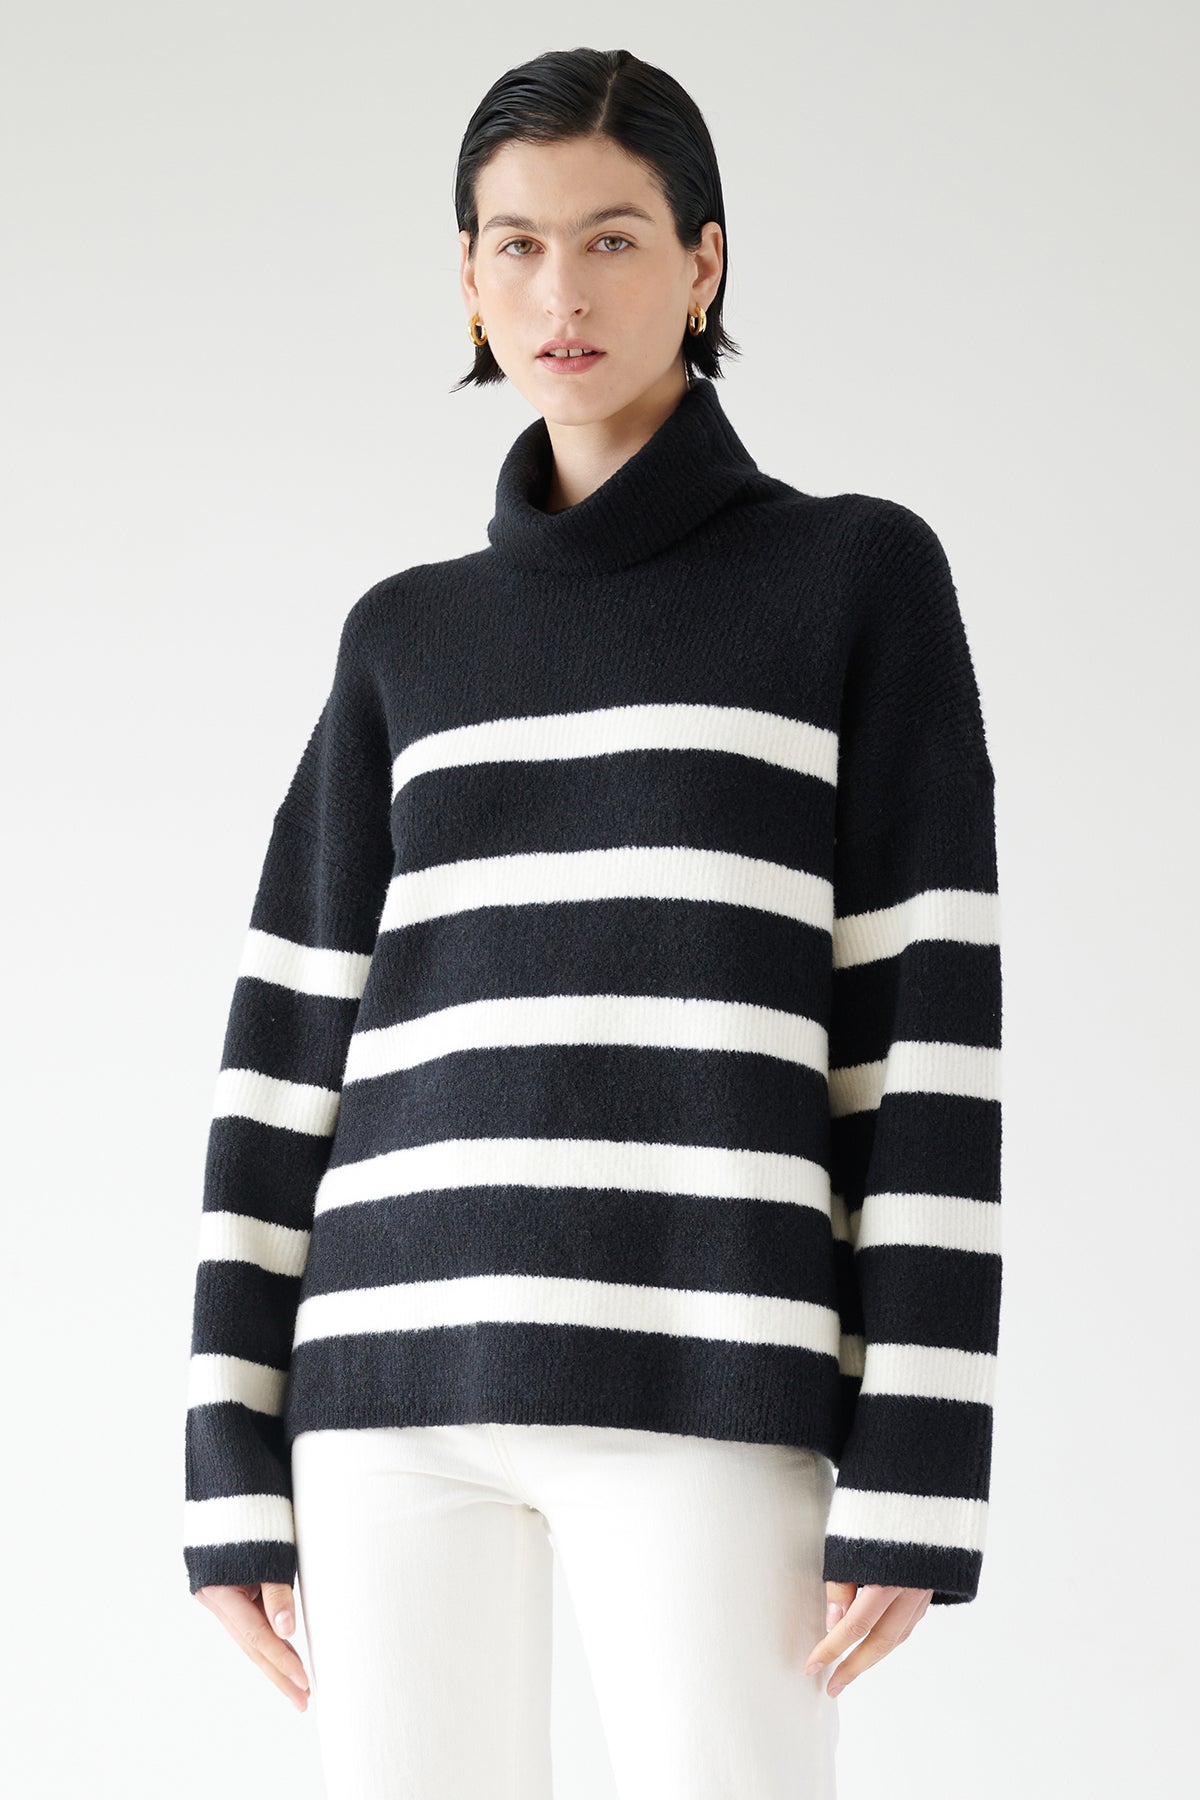   A woman wearing an oversized ENCINO SWEATER by Velvet by Jenny Graham. 